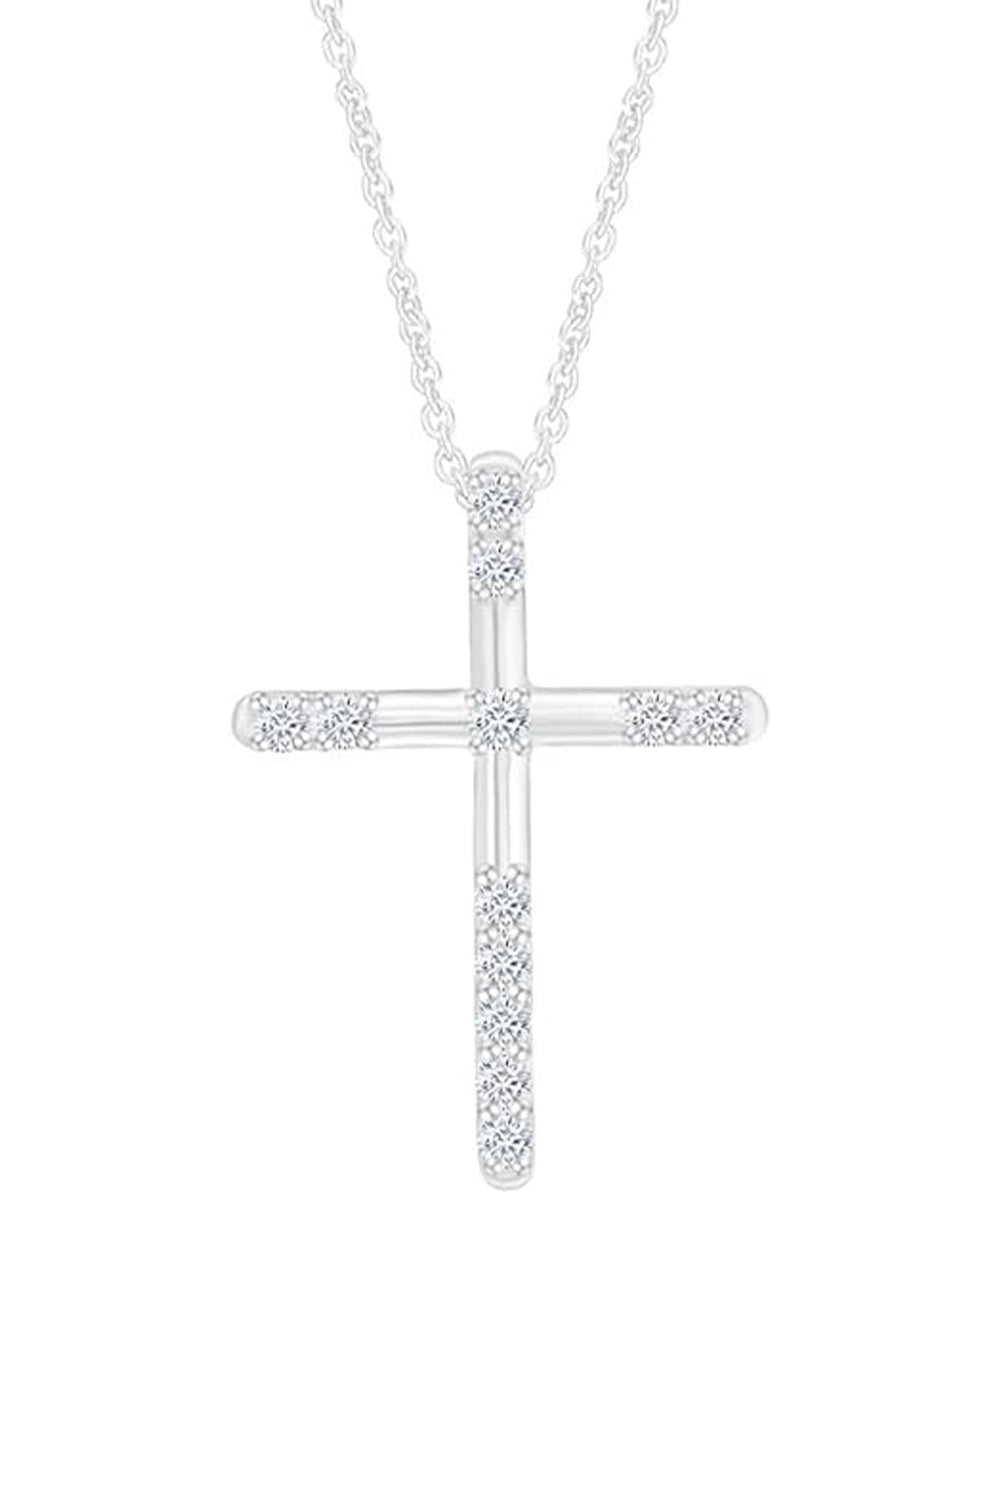 White Gold Color Cross Pendant Necklace for Women, Fashion Jewellery